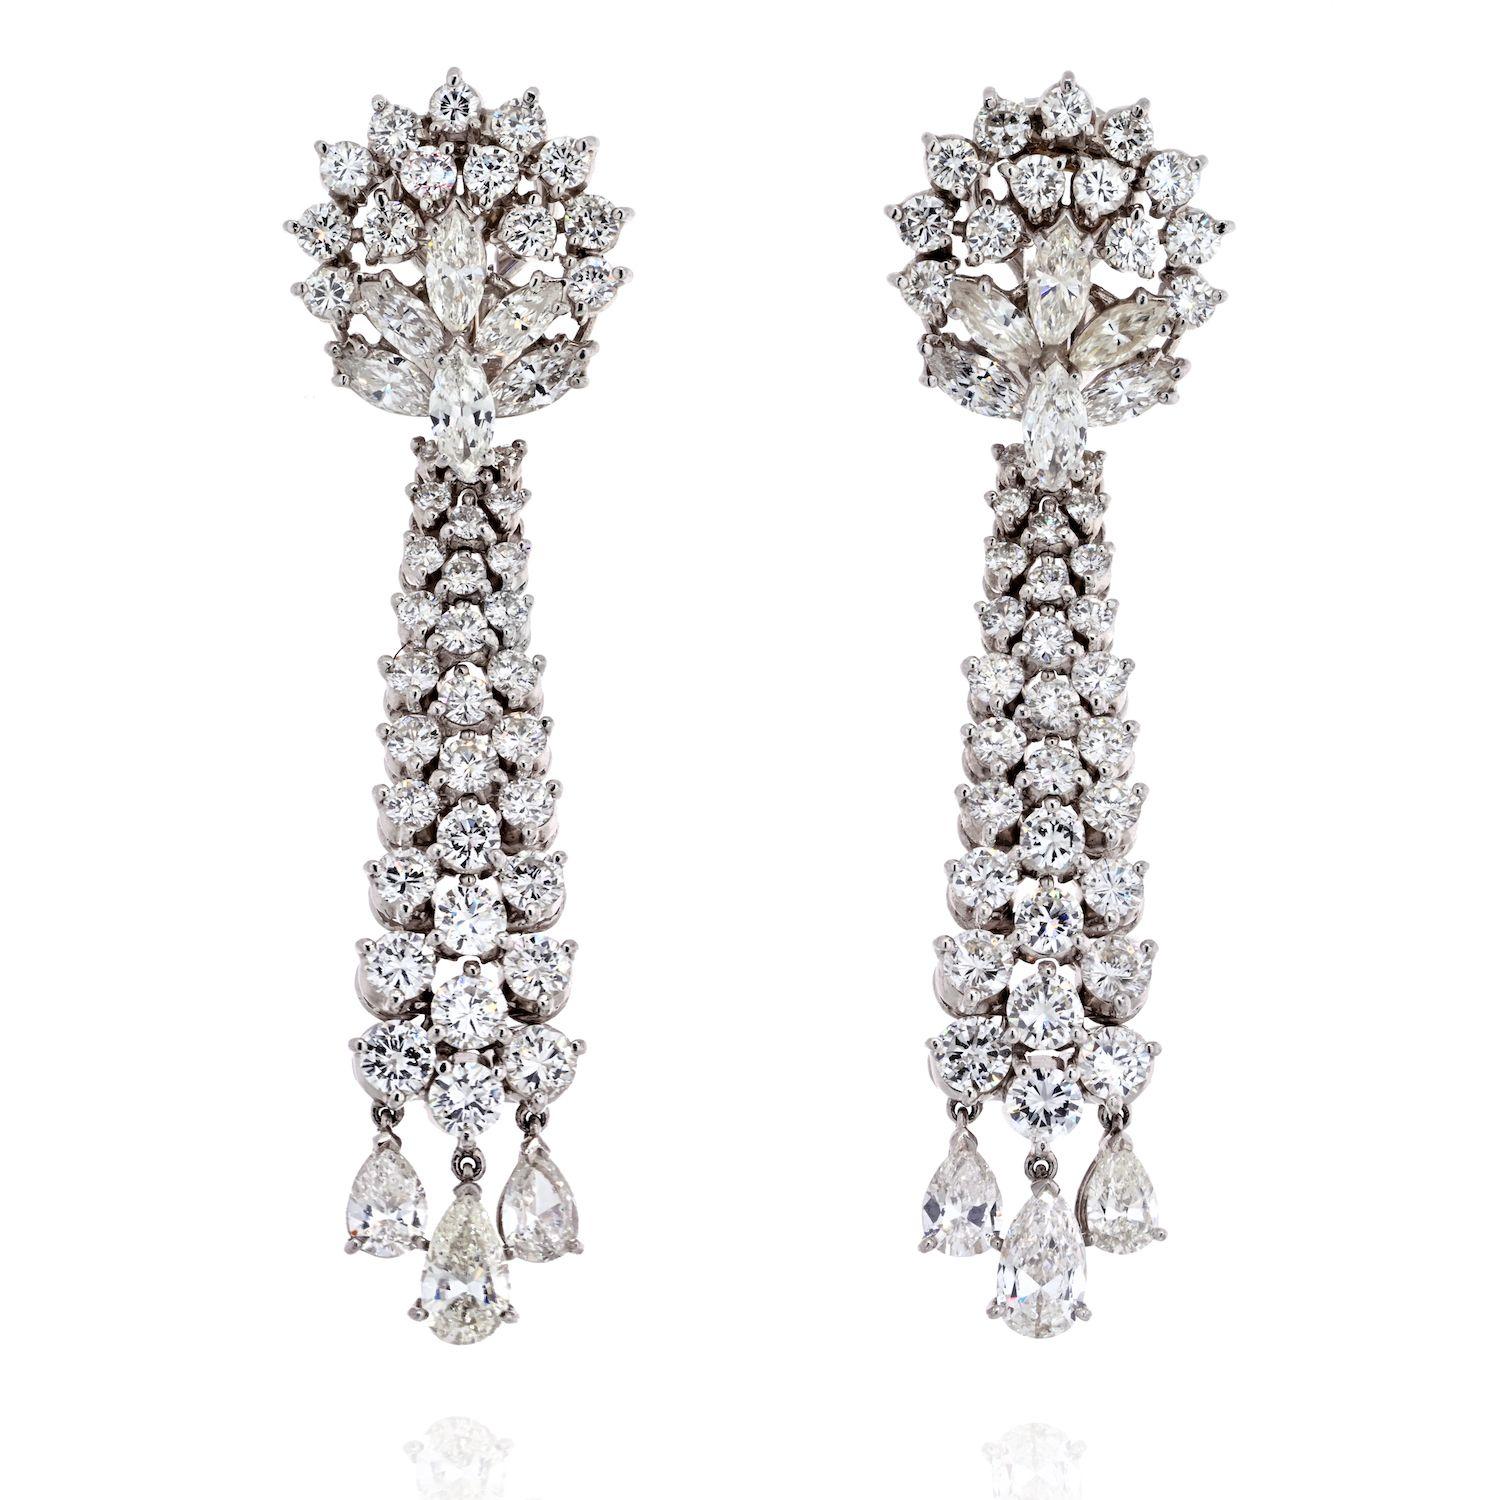 Light up every look with our estate fine diamond chandelier earrings. Inspired by the glitz and glam of Hollywood cinema sirens. Rows of falling diamonds create a radiant sparkle. These lovely diamond drop earrings are set with full cut round, pear